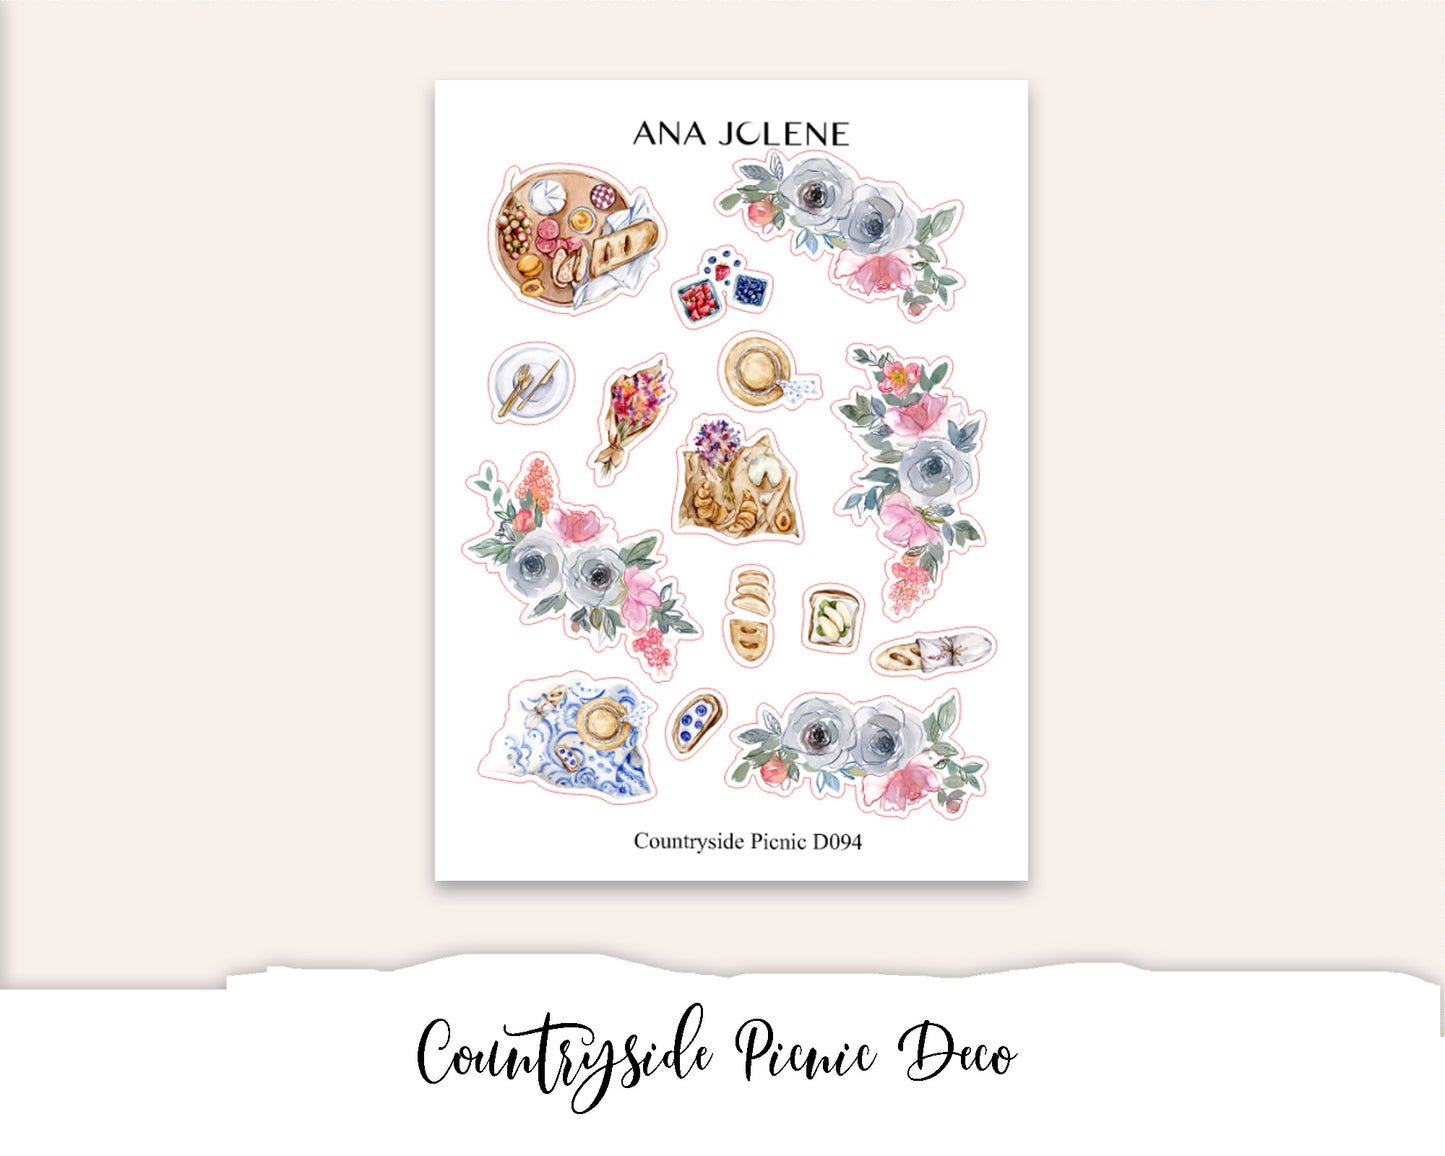 COUNTRYSIDE PICNIC Planner Sticker Kit (Vertical Weekly)